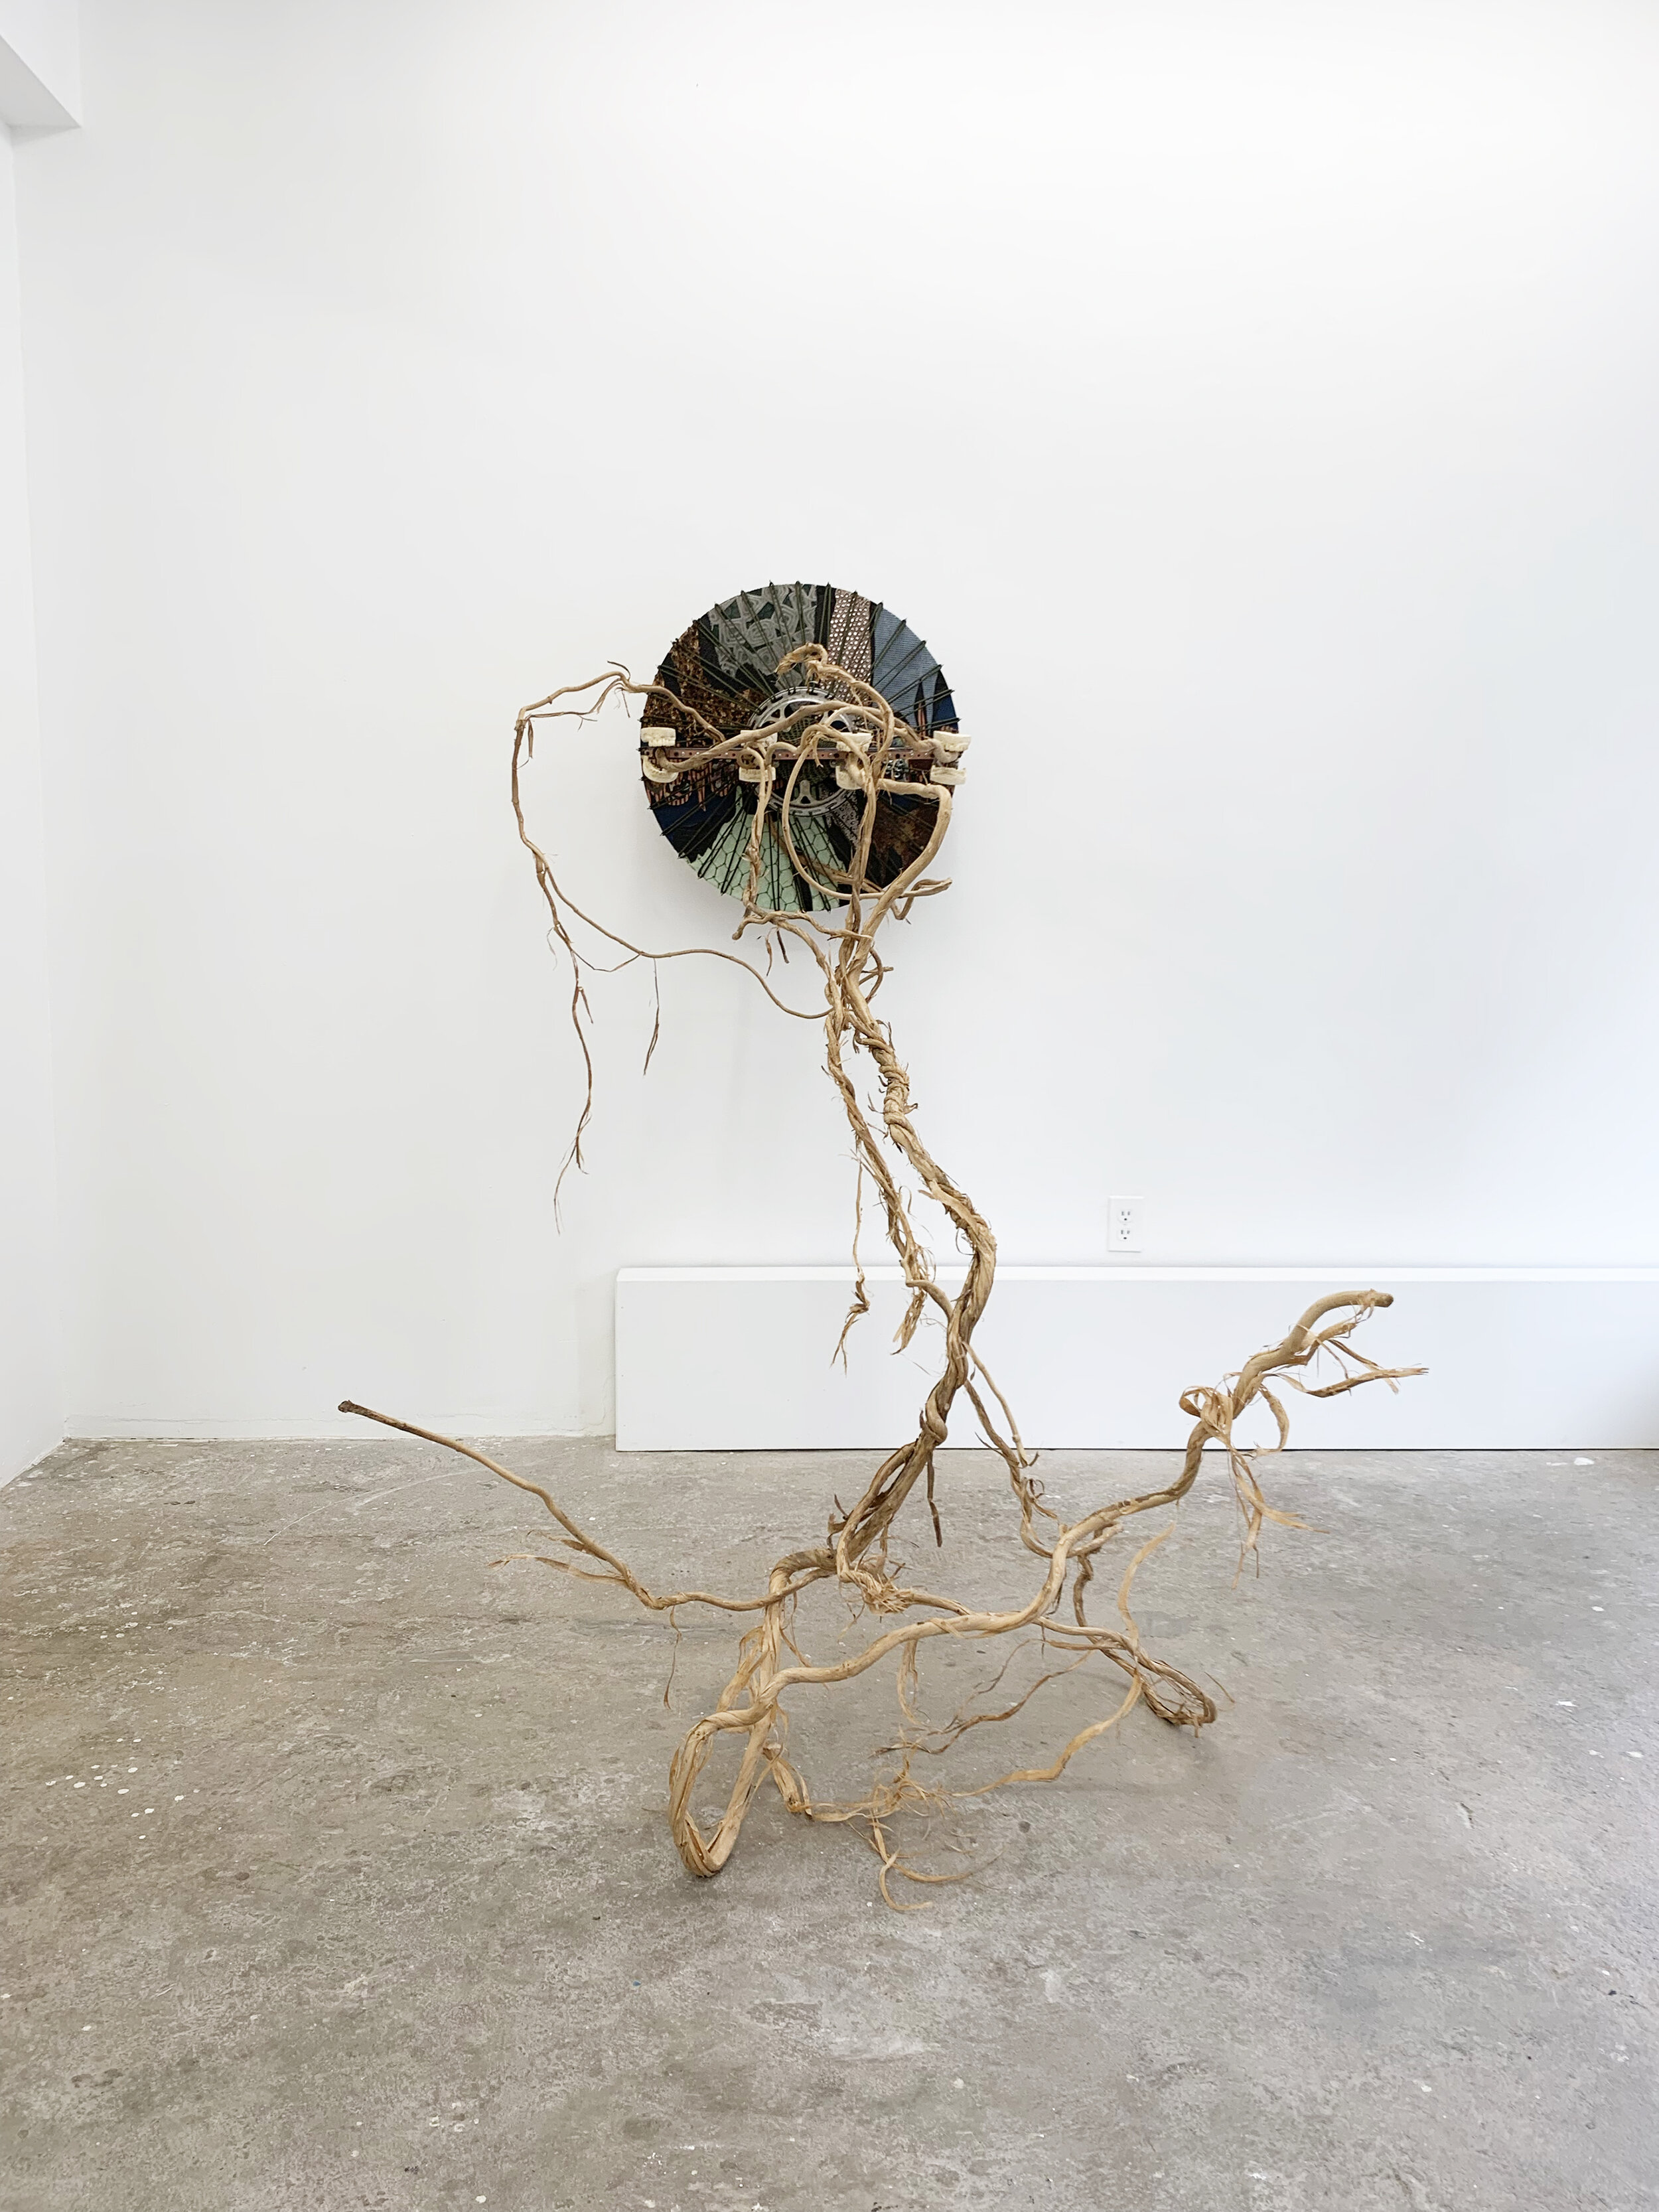 Julius Linnenbrink / Lorna Williams 2019 exhibition at Cindy Rucker Gallery, installation image of a Lorna Williams a sculpture